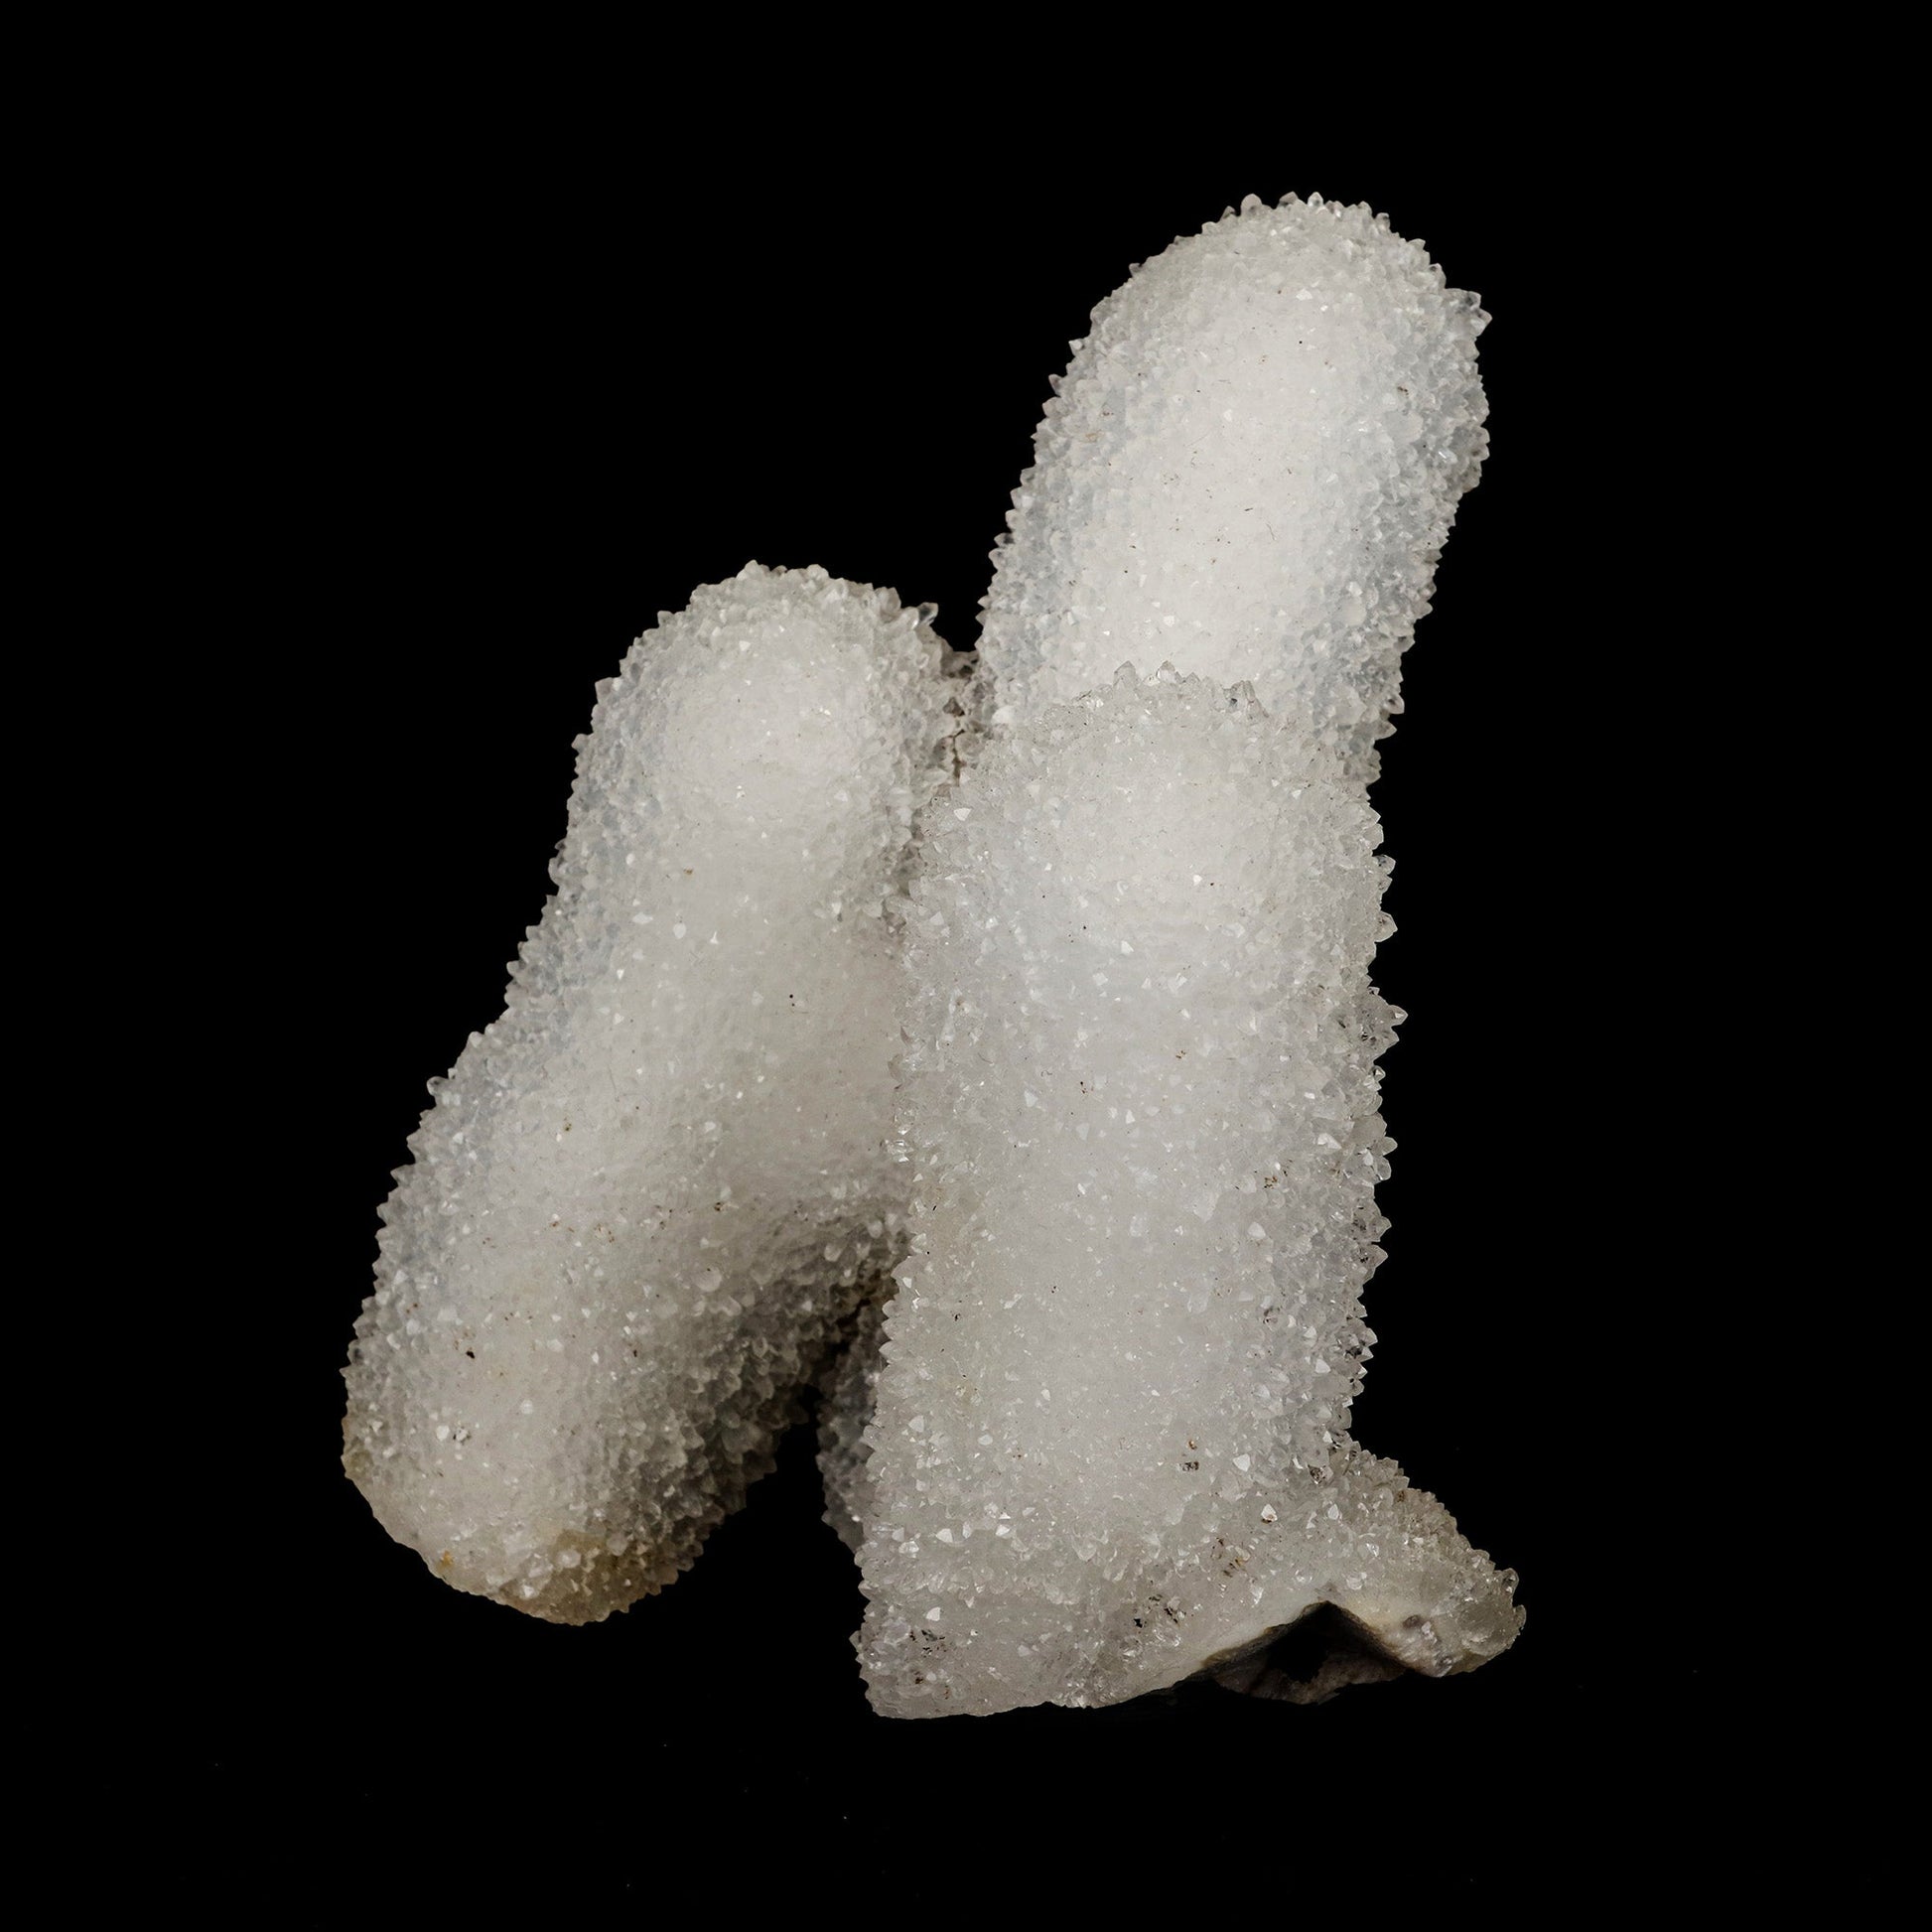 MM Quartz Triple Tower Formation Natural Mineral Specimen # B 5229  https://www.superbminerals.us/products/mm-quartz-triple-tower-formation-natural-mineral-specimen-b-5229  Features: A glossy covering of Apophyllite crystals is partially encrusted on a bright white, microcrystalline Quartz stalactite. The lustre, colour, and crystal formation, as well as the combination and contrast, are all remarkable.In good condition, this is a remarkable and attractive piece. Primary Mineral(s): MM 